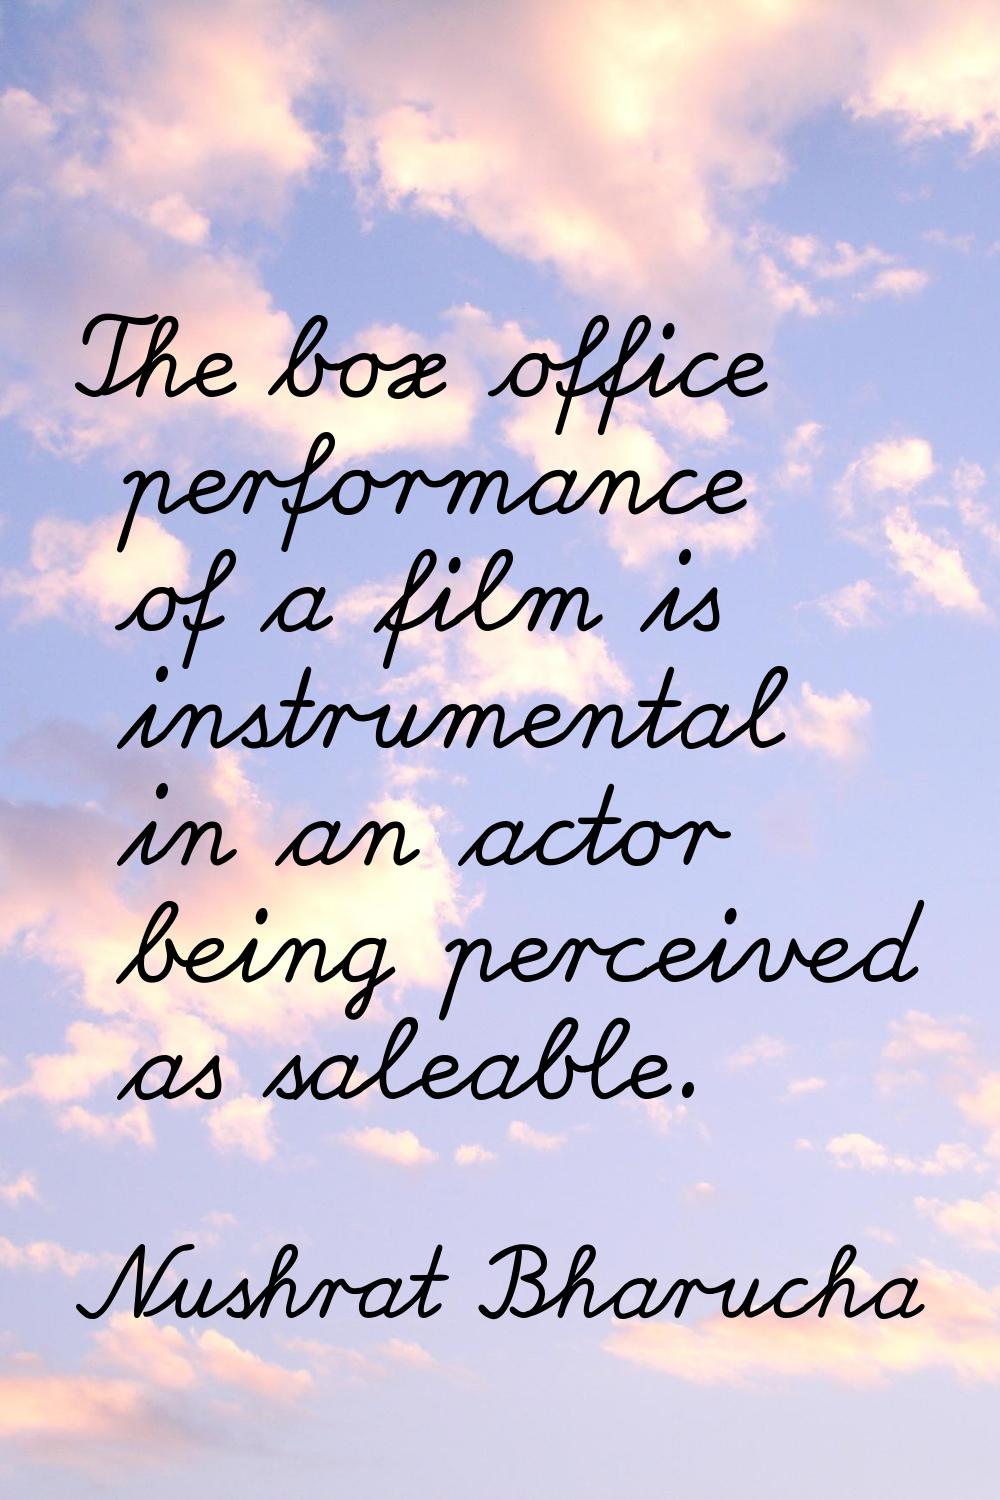 The box office performance of a film is instrumental in an actor being perceived as saleable.